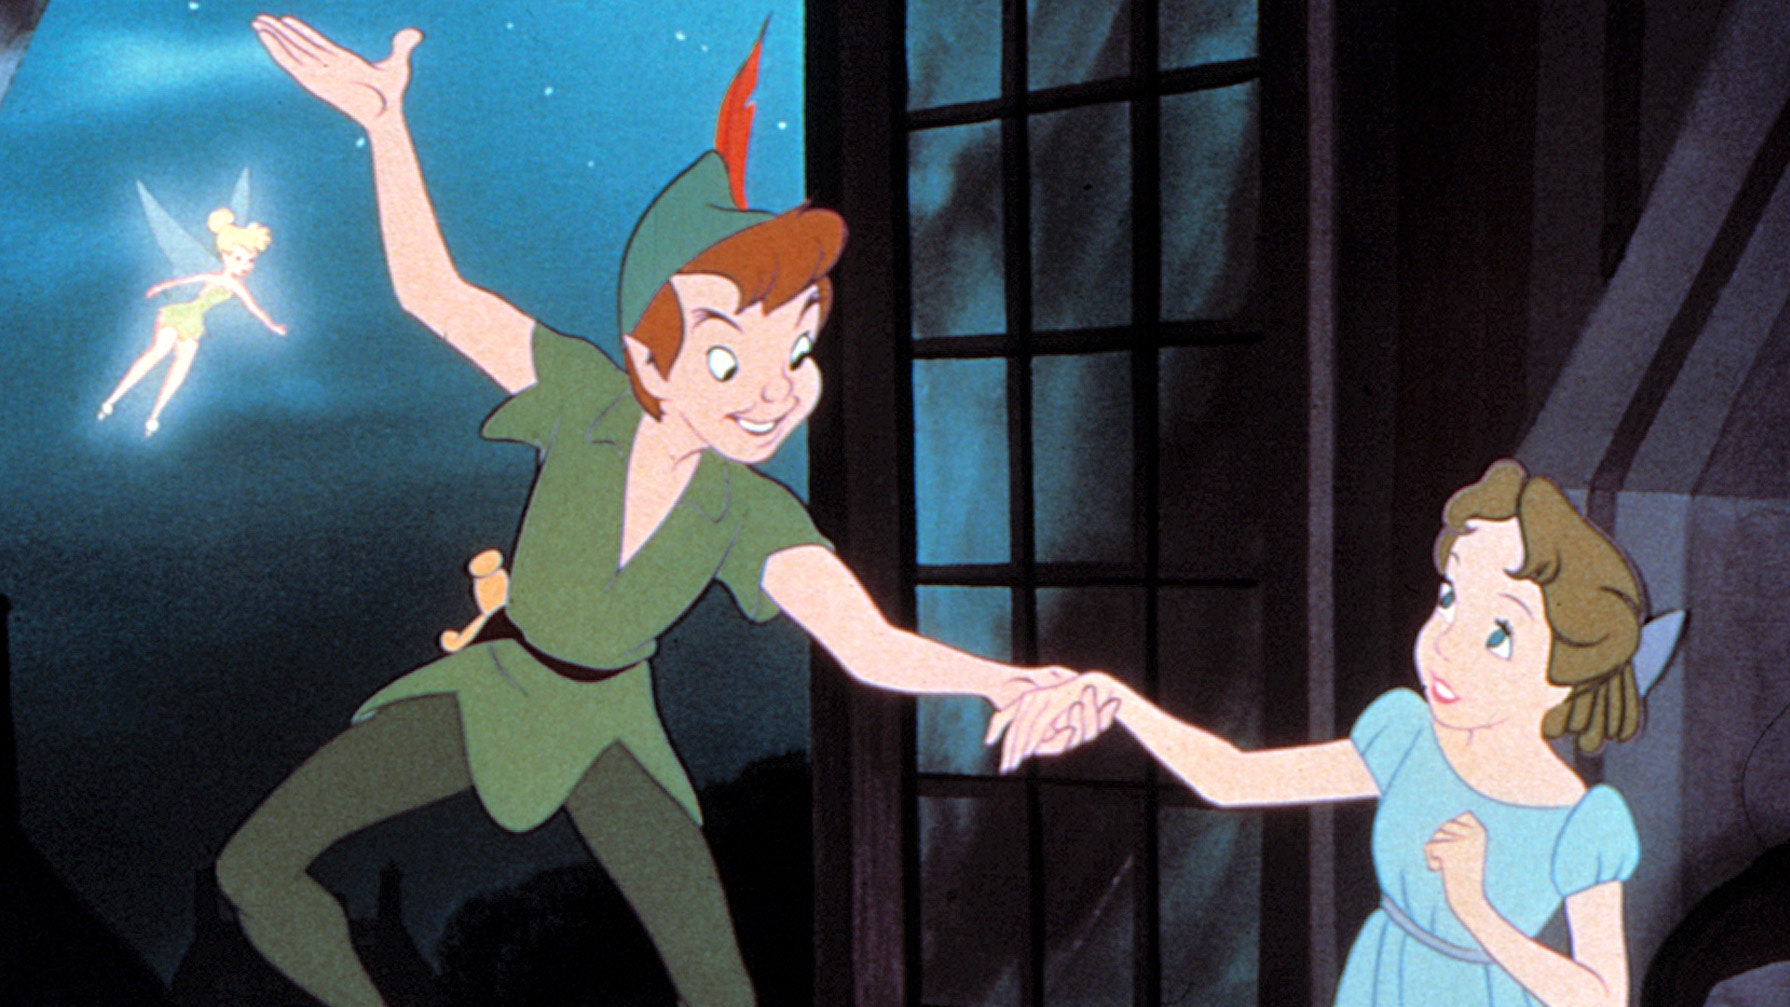 ben salentine recommends pictures of peter pan and tinkerbell pic